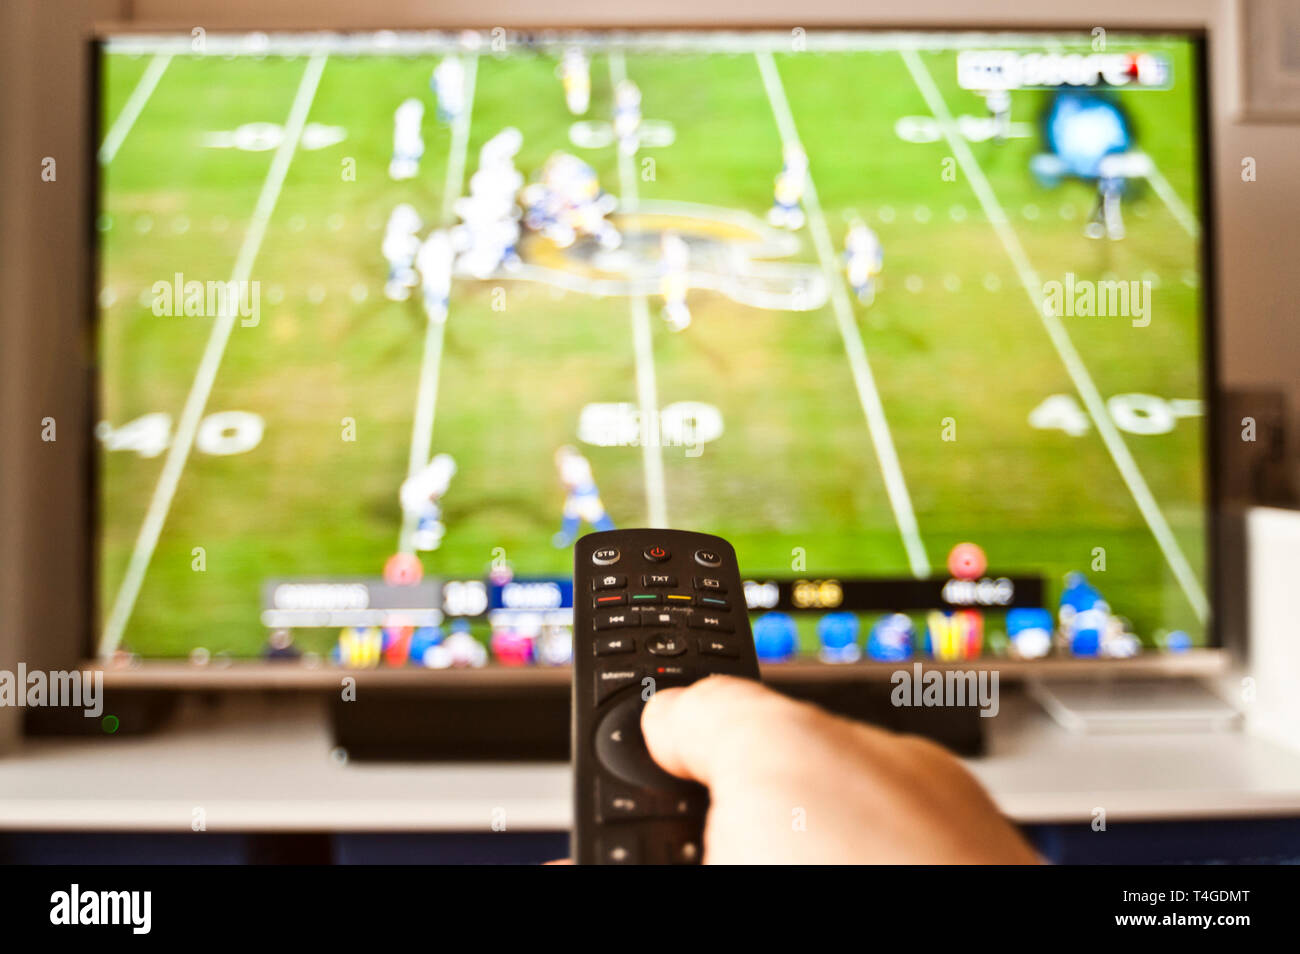 hand holding remote control in front of tv on a sport channel Stock Photo